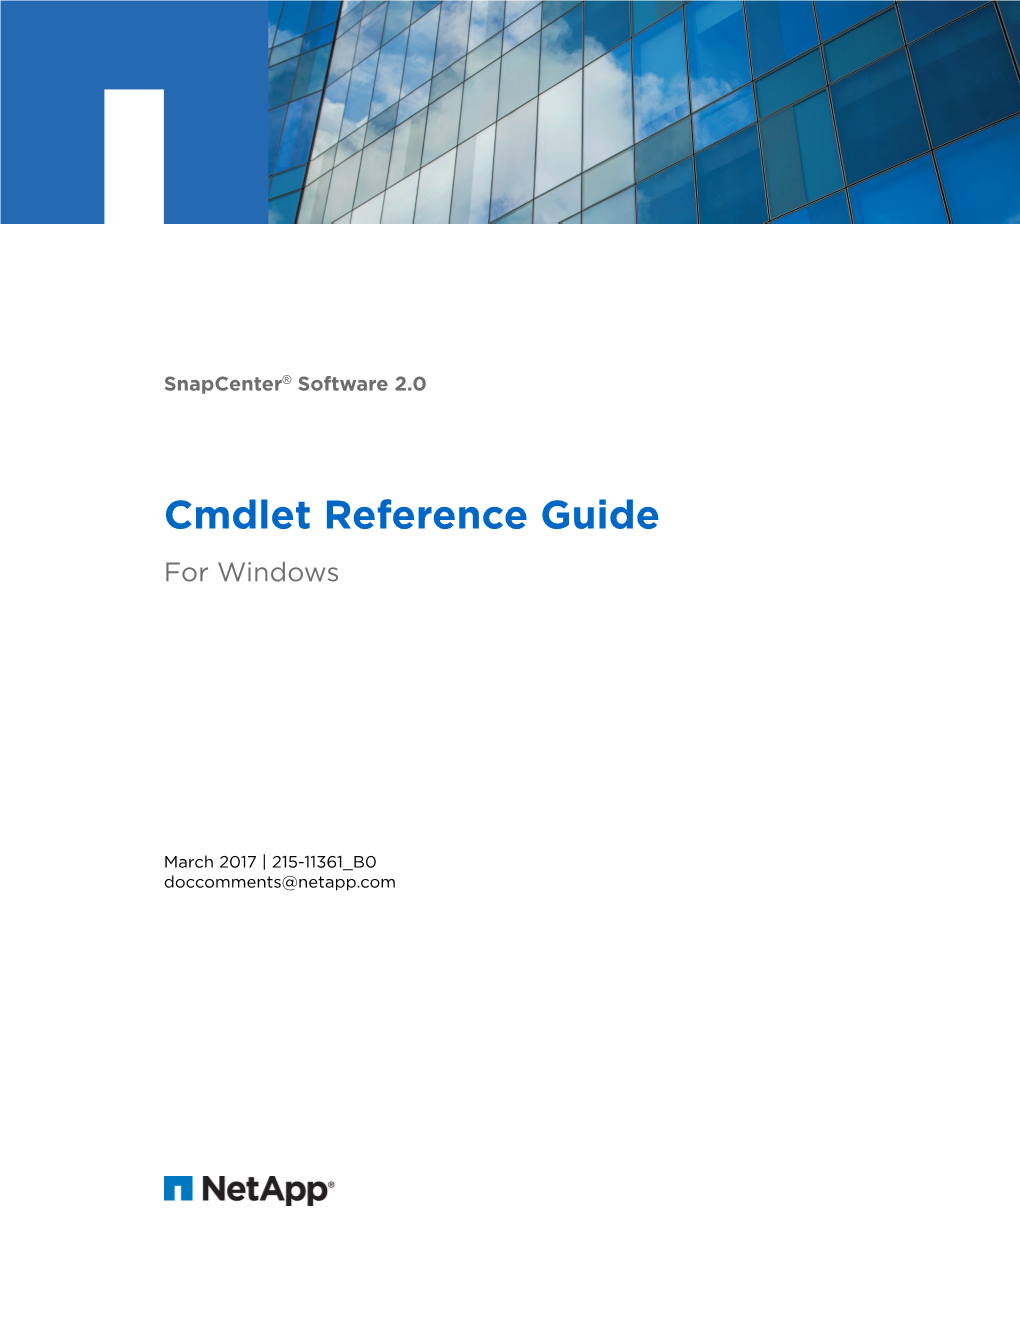 Cmdlet Reference Guide for Windows